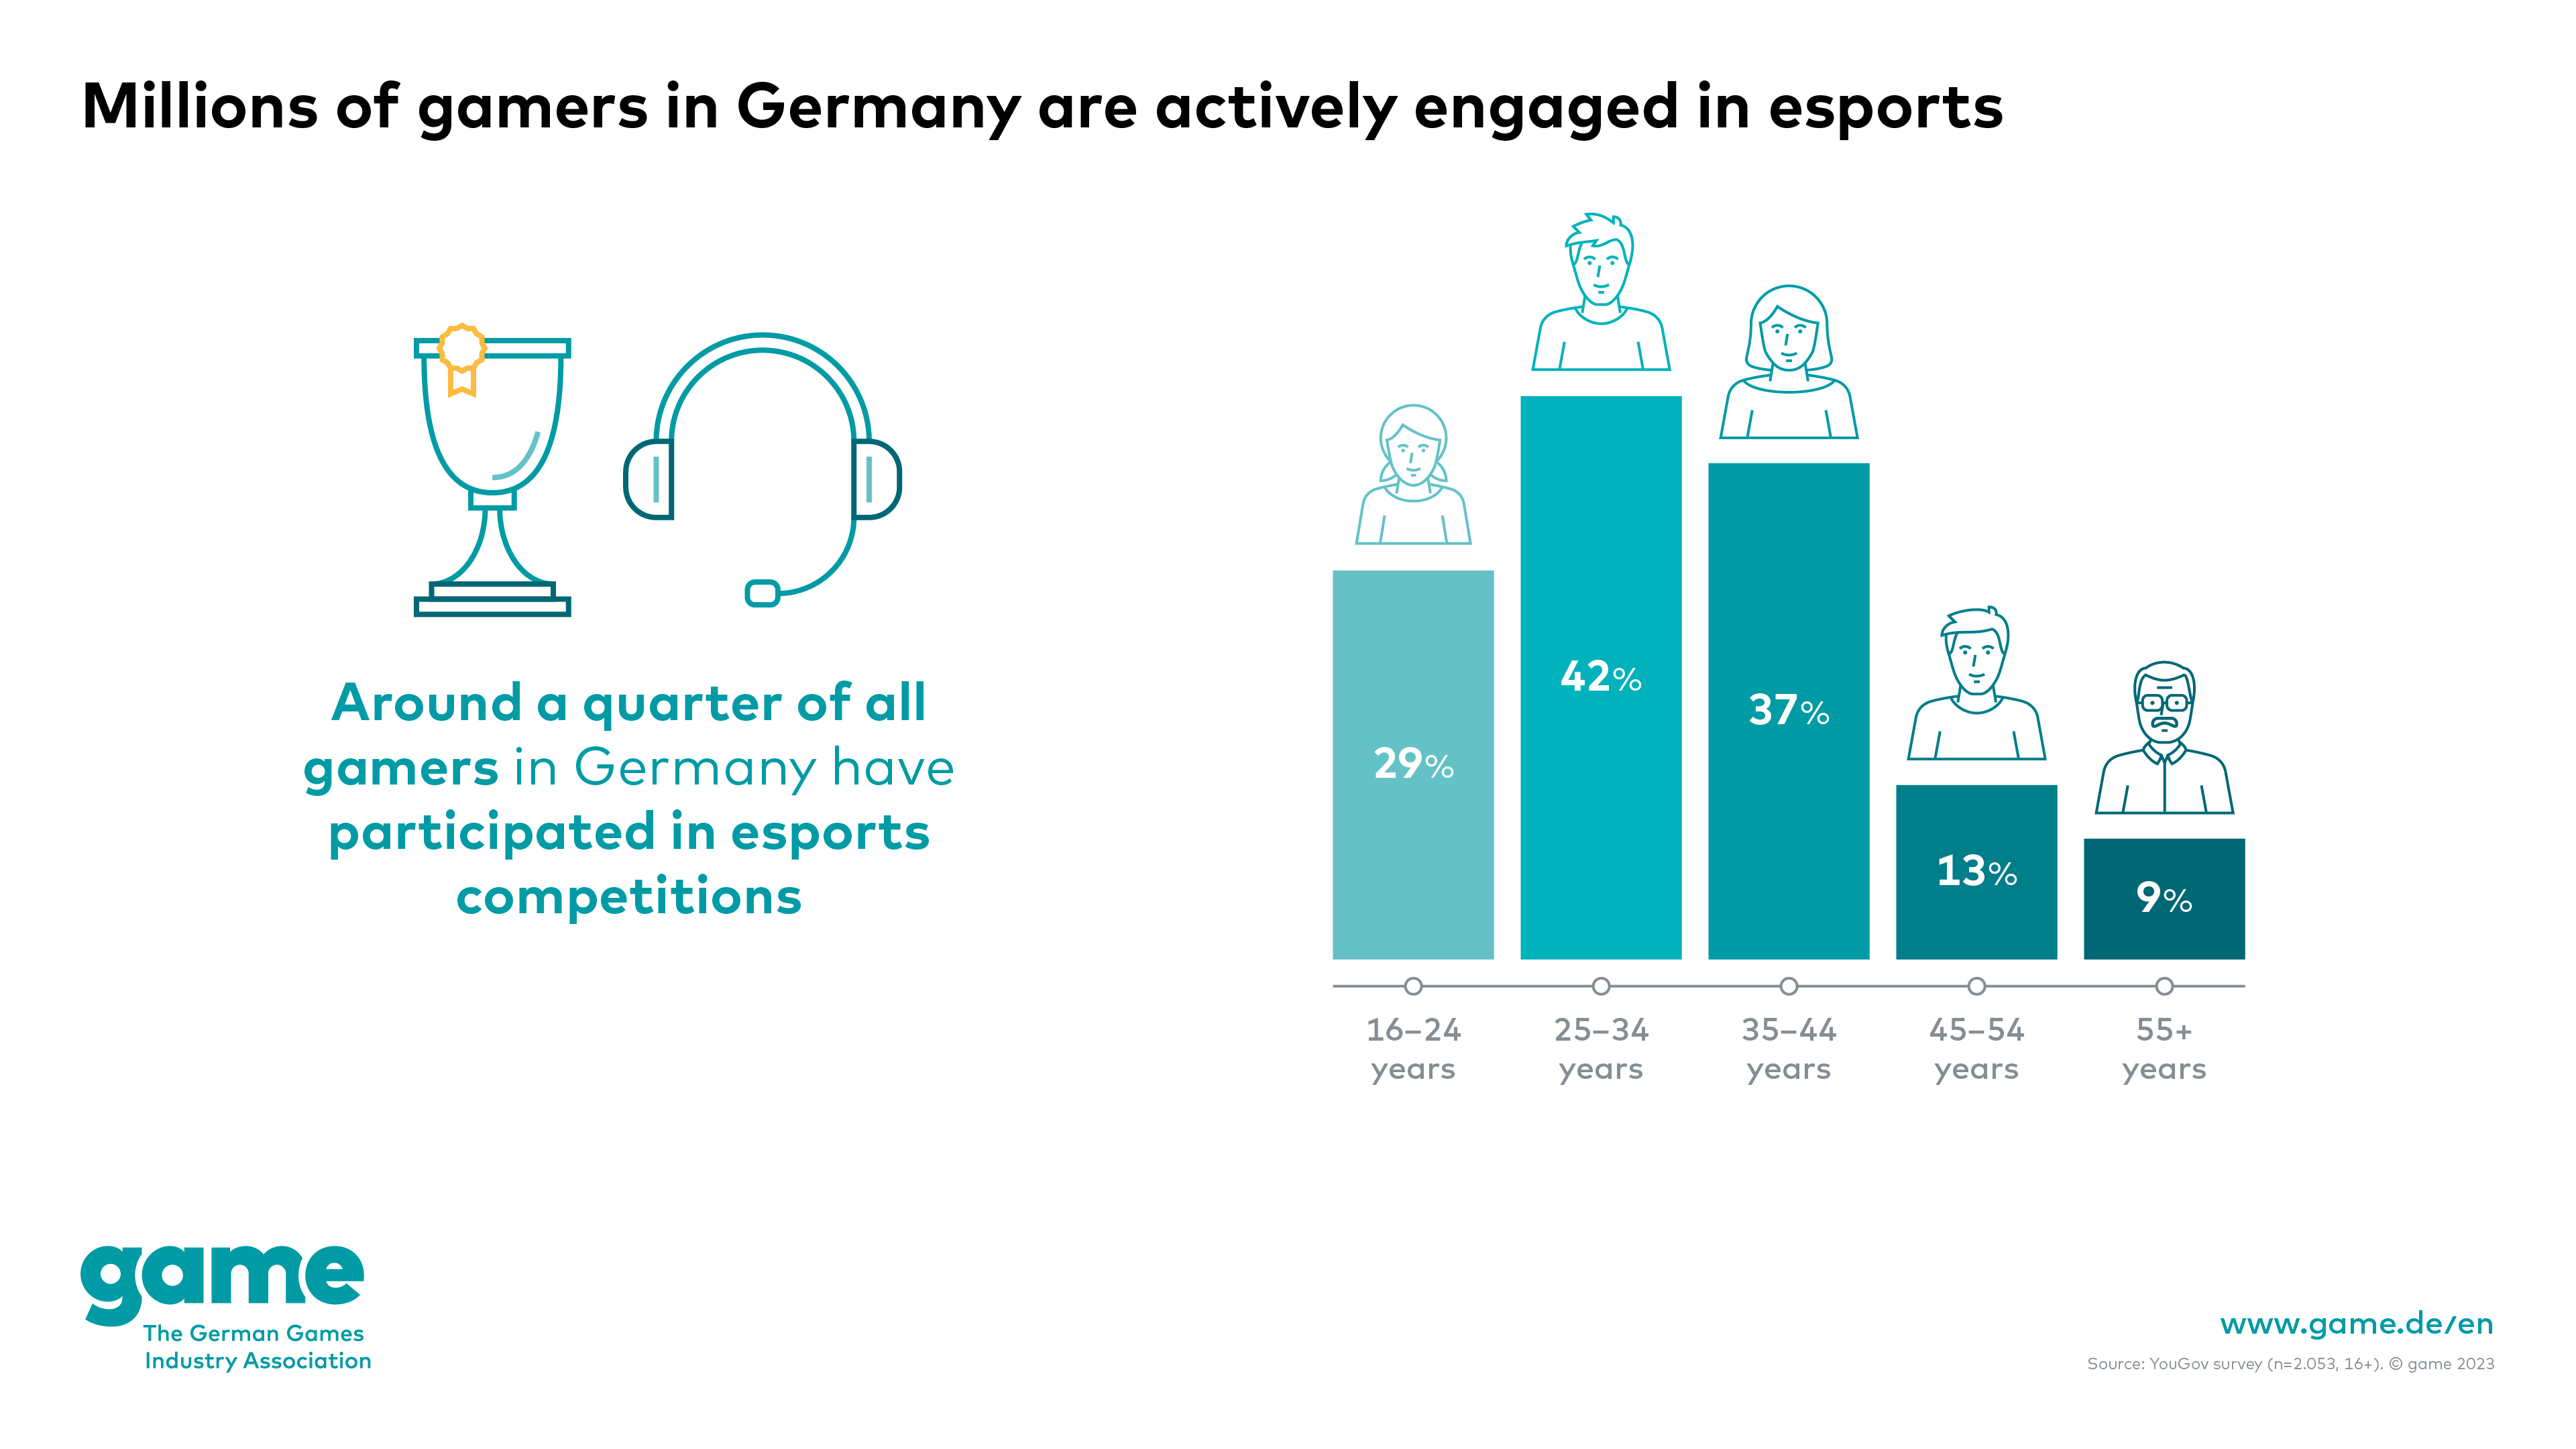 Millions of gamers in Germany are actively engaged in esports